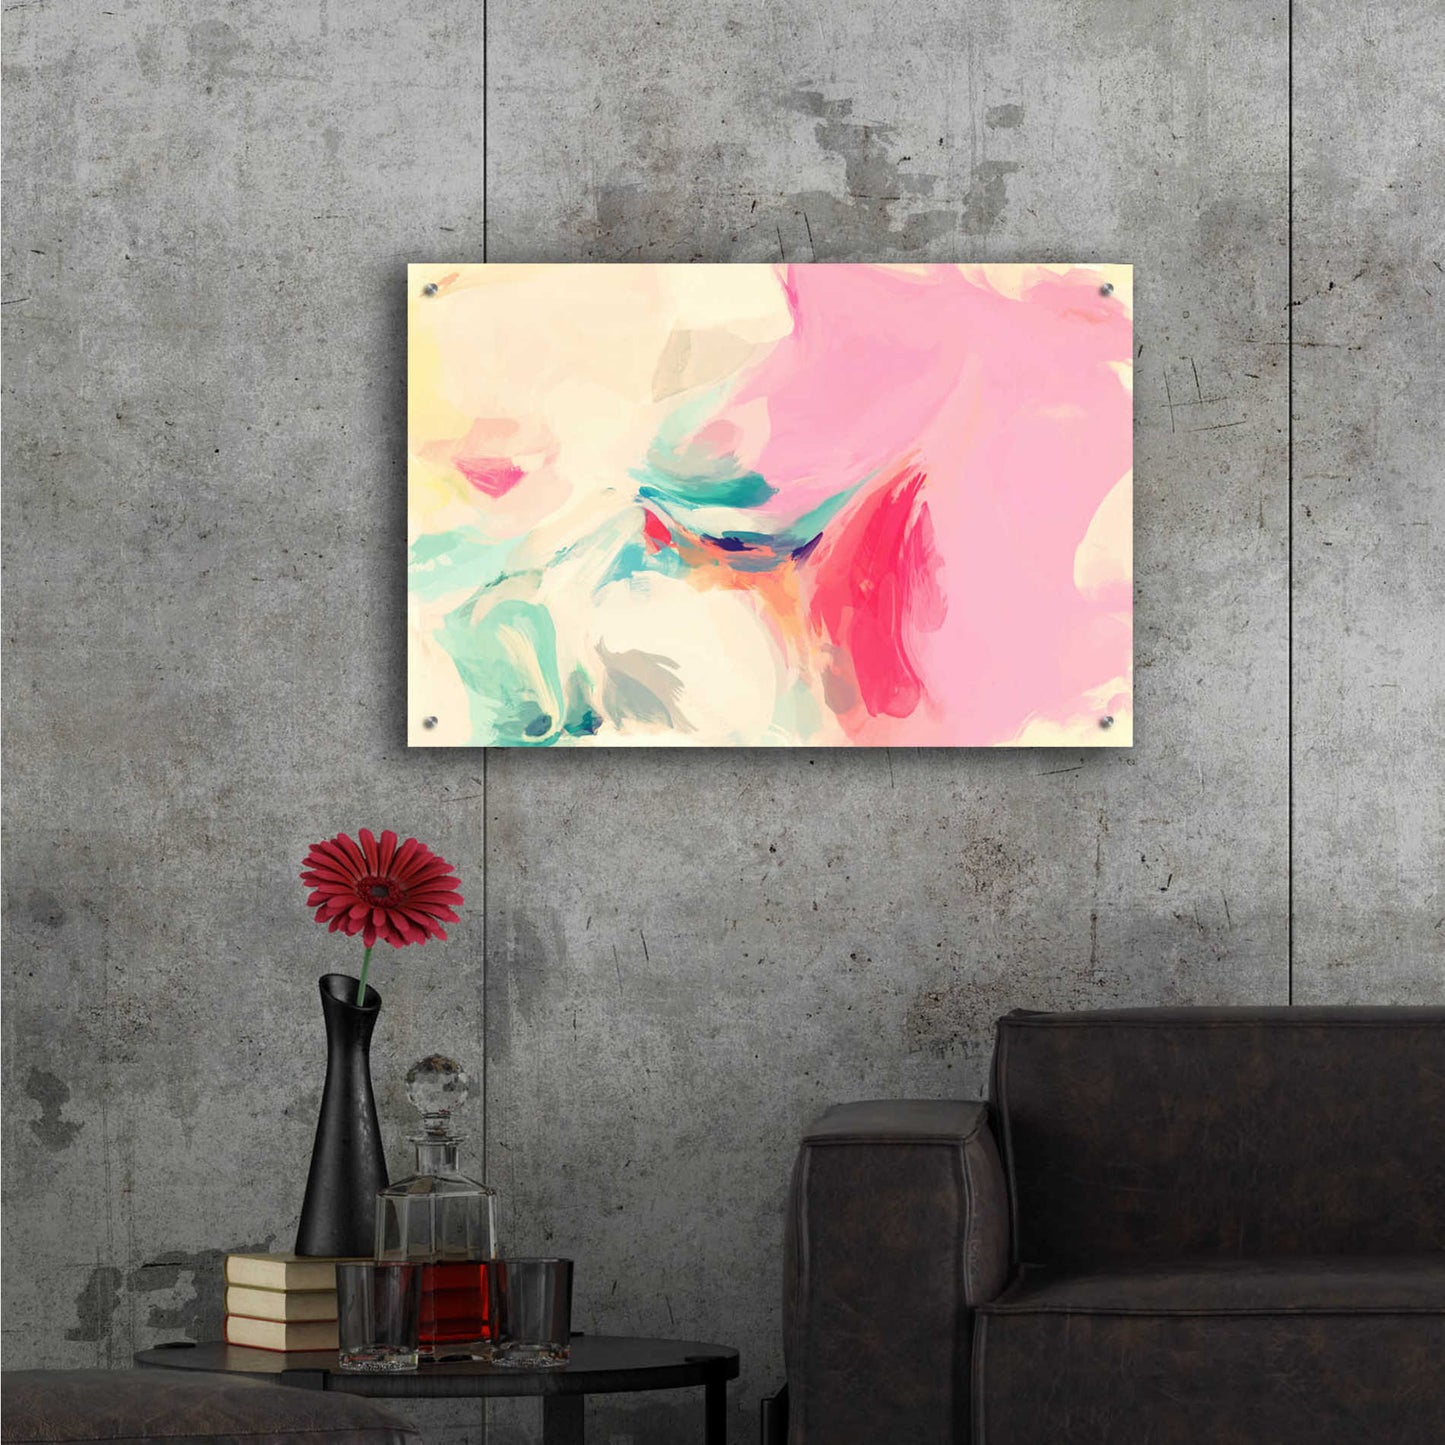 Epic Art 'Abstract Colorful Flows 9' by Irena Orlov Acrylic Glass Wall Art,36x24